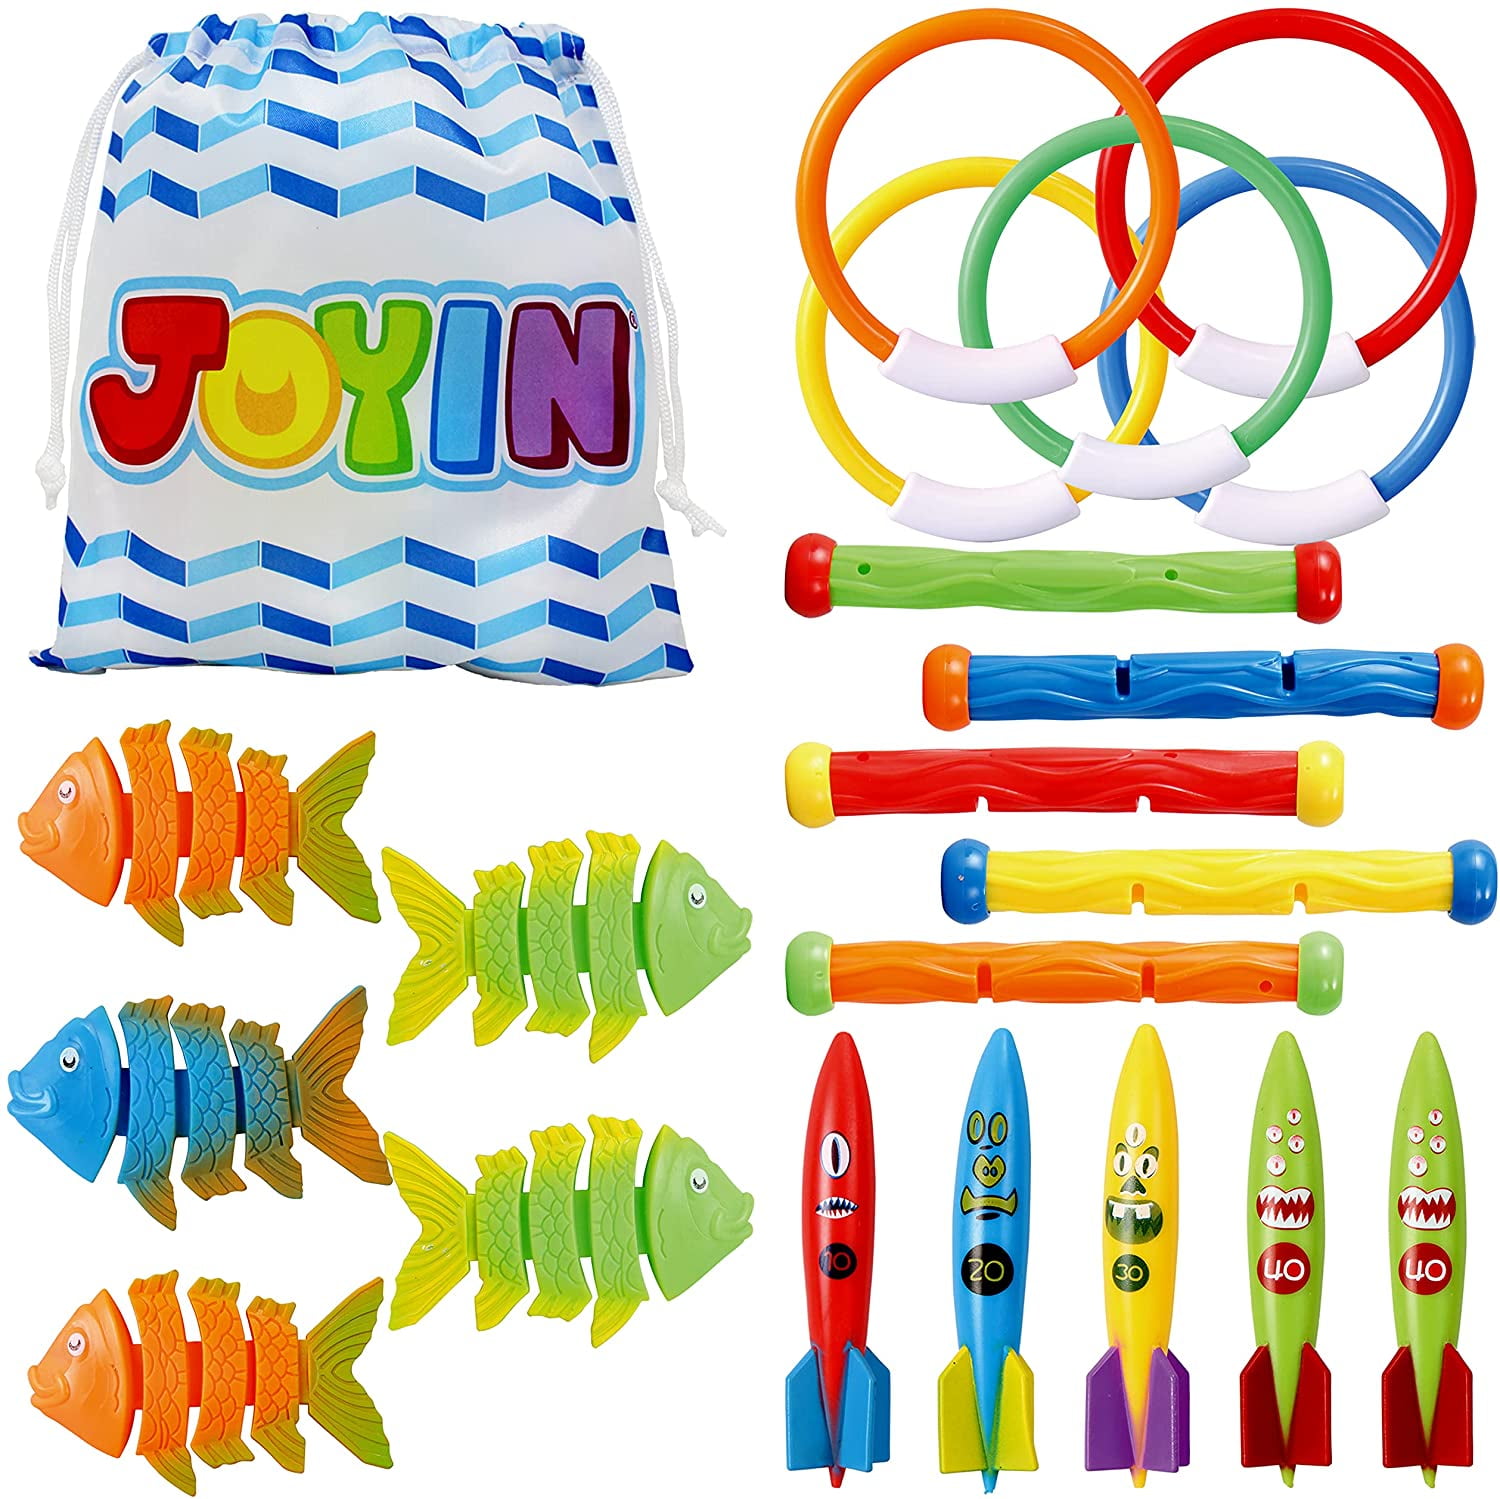 Fun-Here Diving Toys 32 Pcs Pool Toys Swimming Training Water Game Dive Rings Sticks Grass Fish Treasures with Storage Bag for Kids Boys Girls Adults 